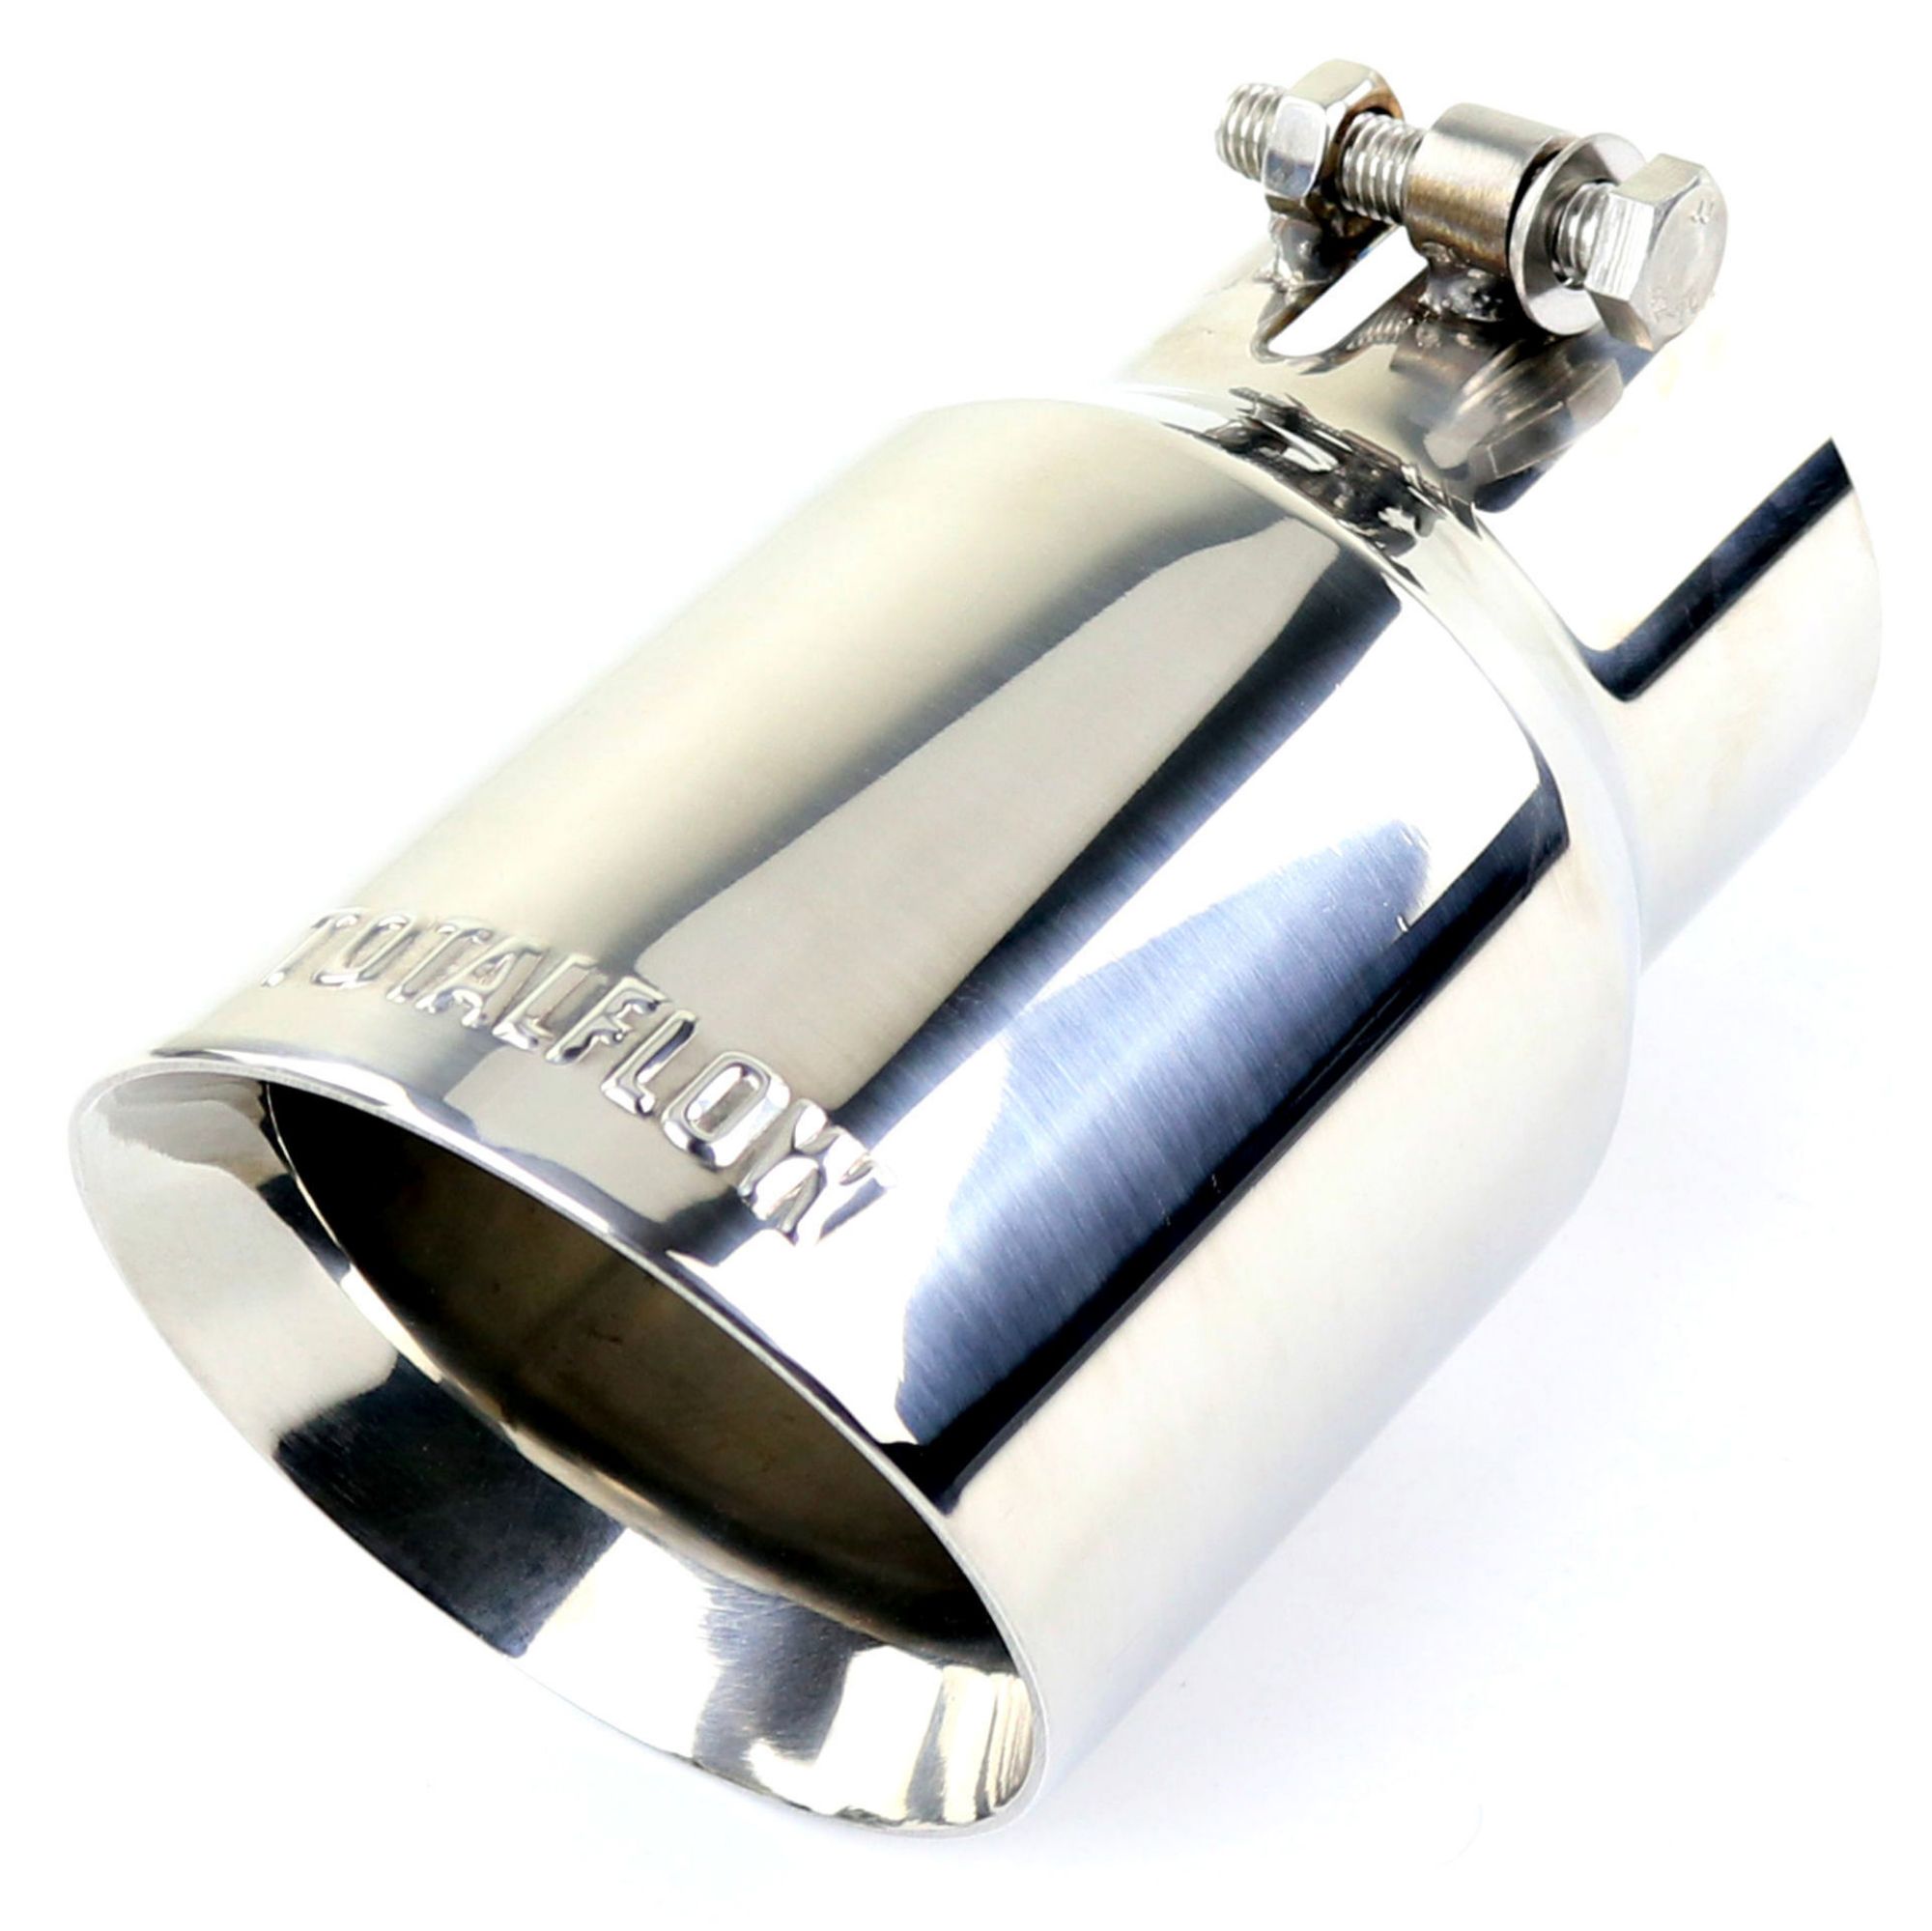 TOTALFLOW 47225P Universal 2-1/4" Inch Bolt-On Double Wall 2.25" Inch Exhaust Tip - Polished Finish